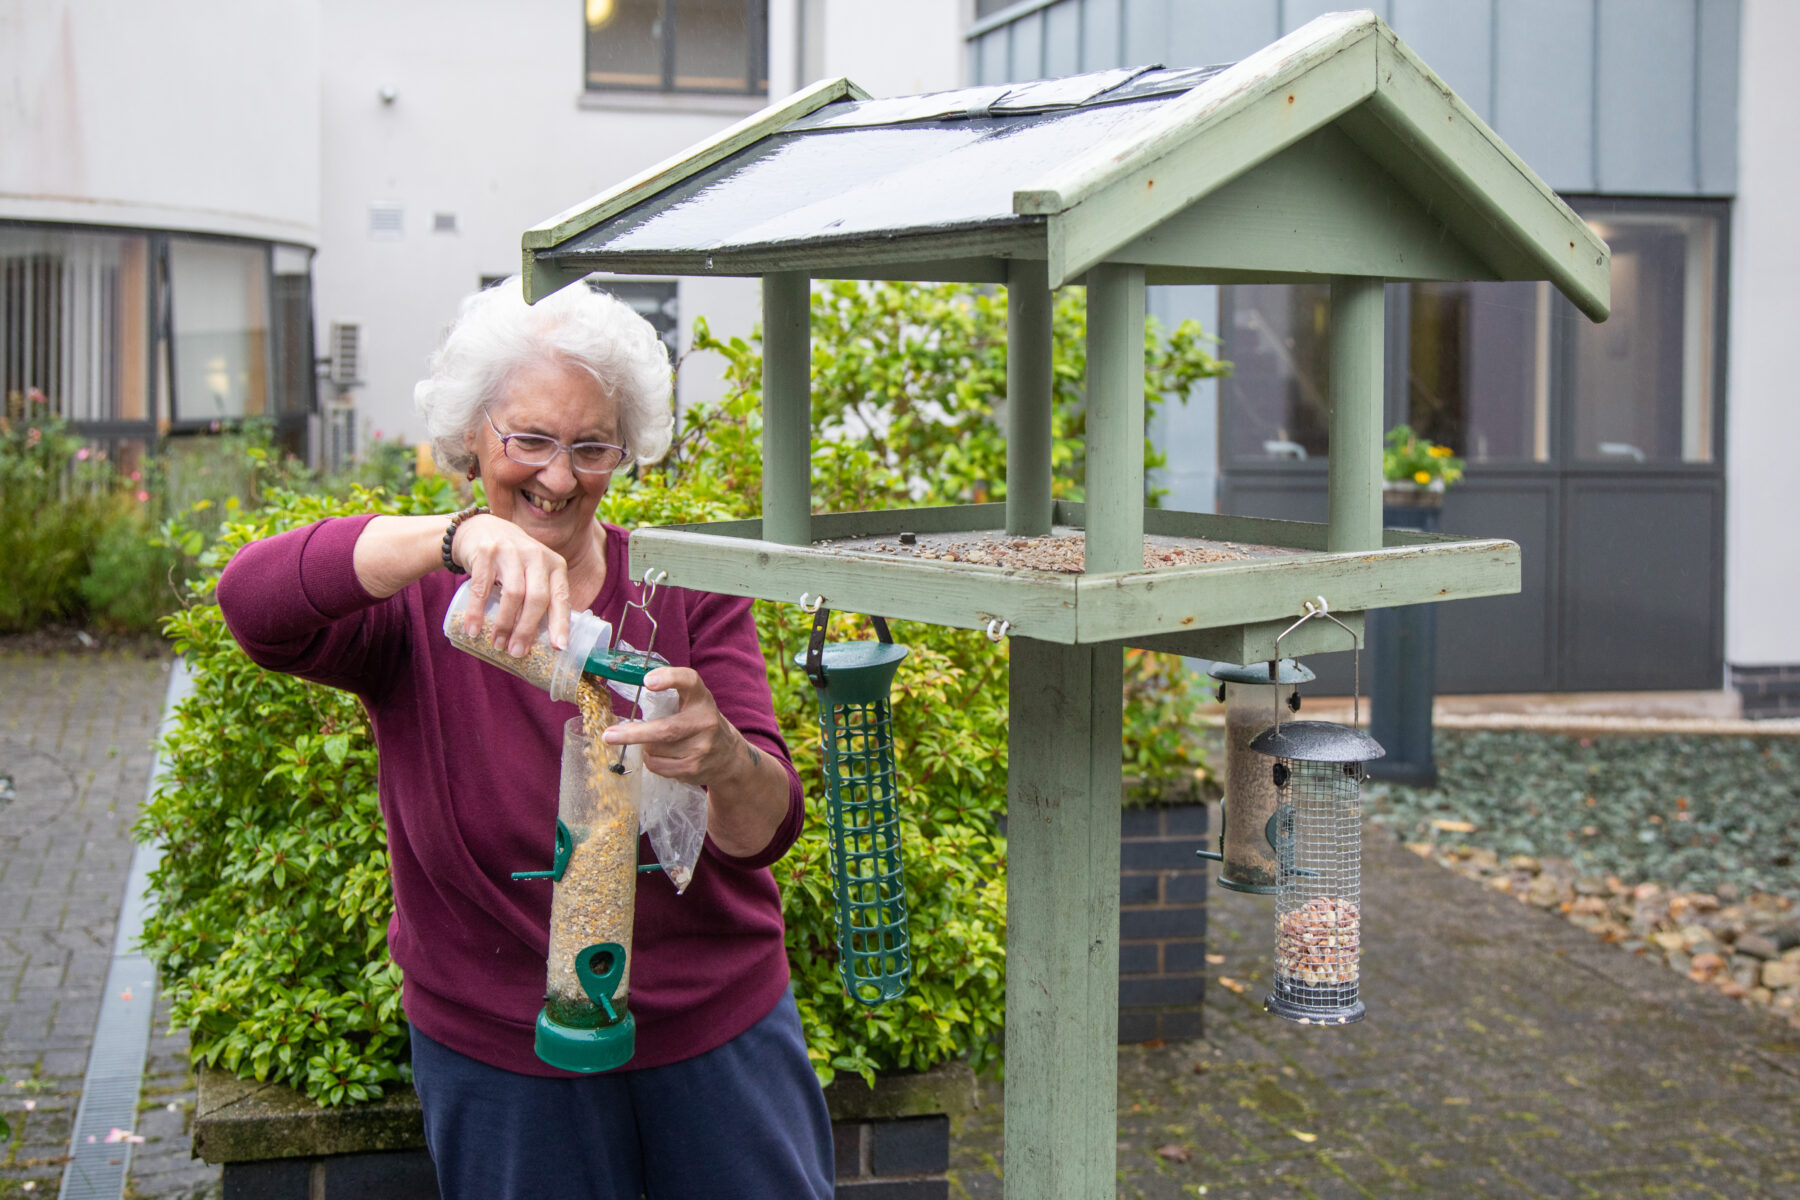 One of the Awel y Coleg residents feeding the birds in the garden